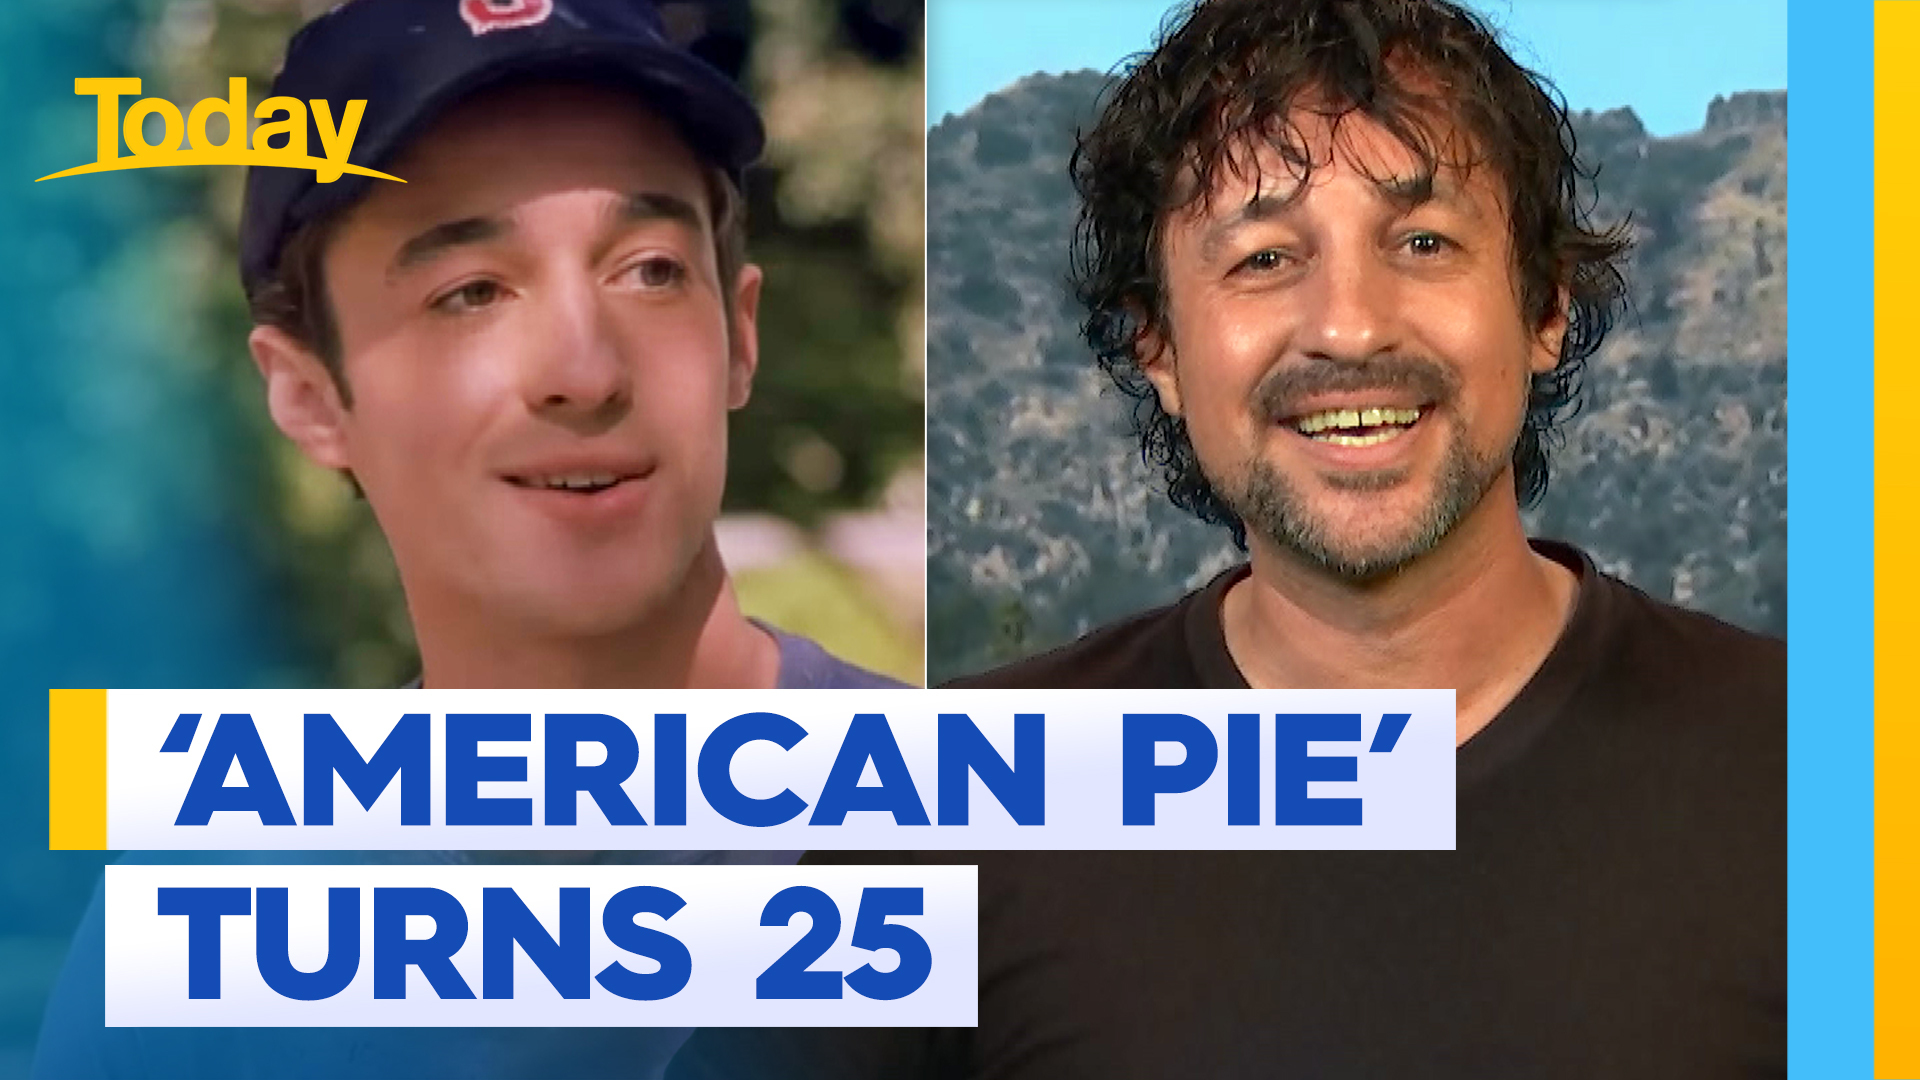 American Pie celebrates 25 years since release